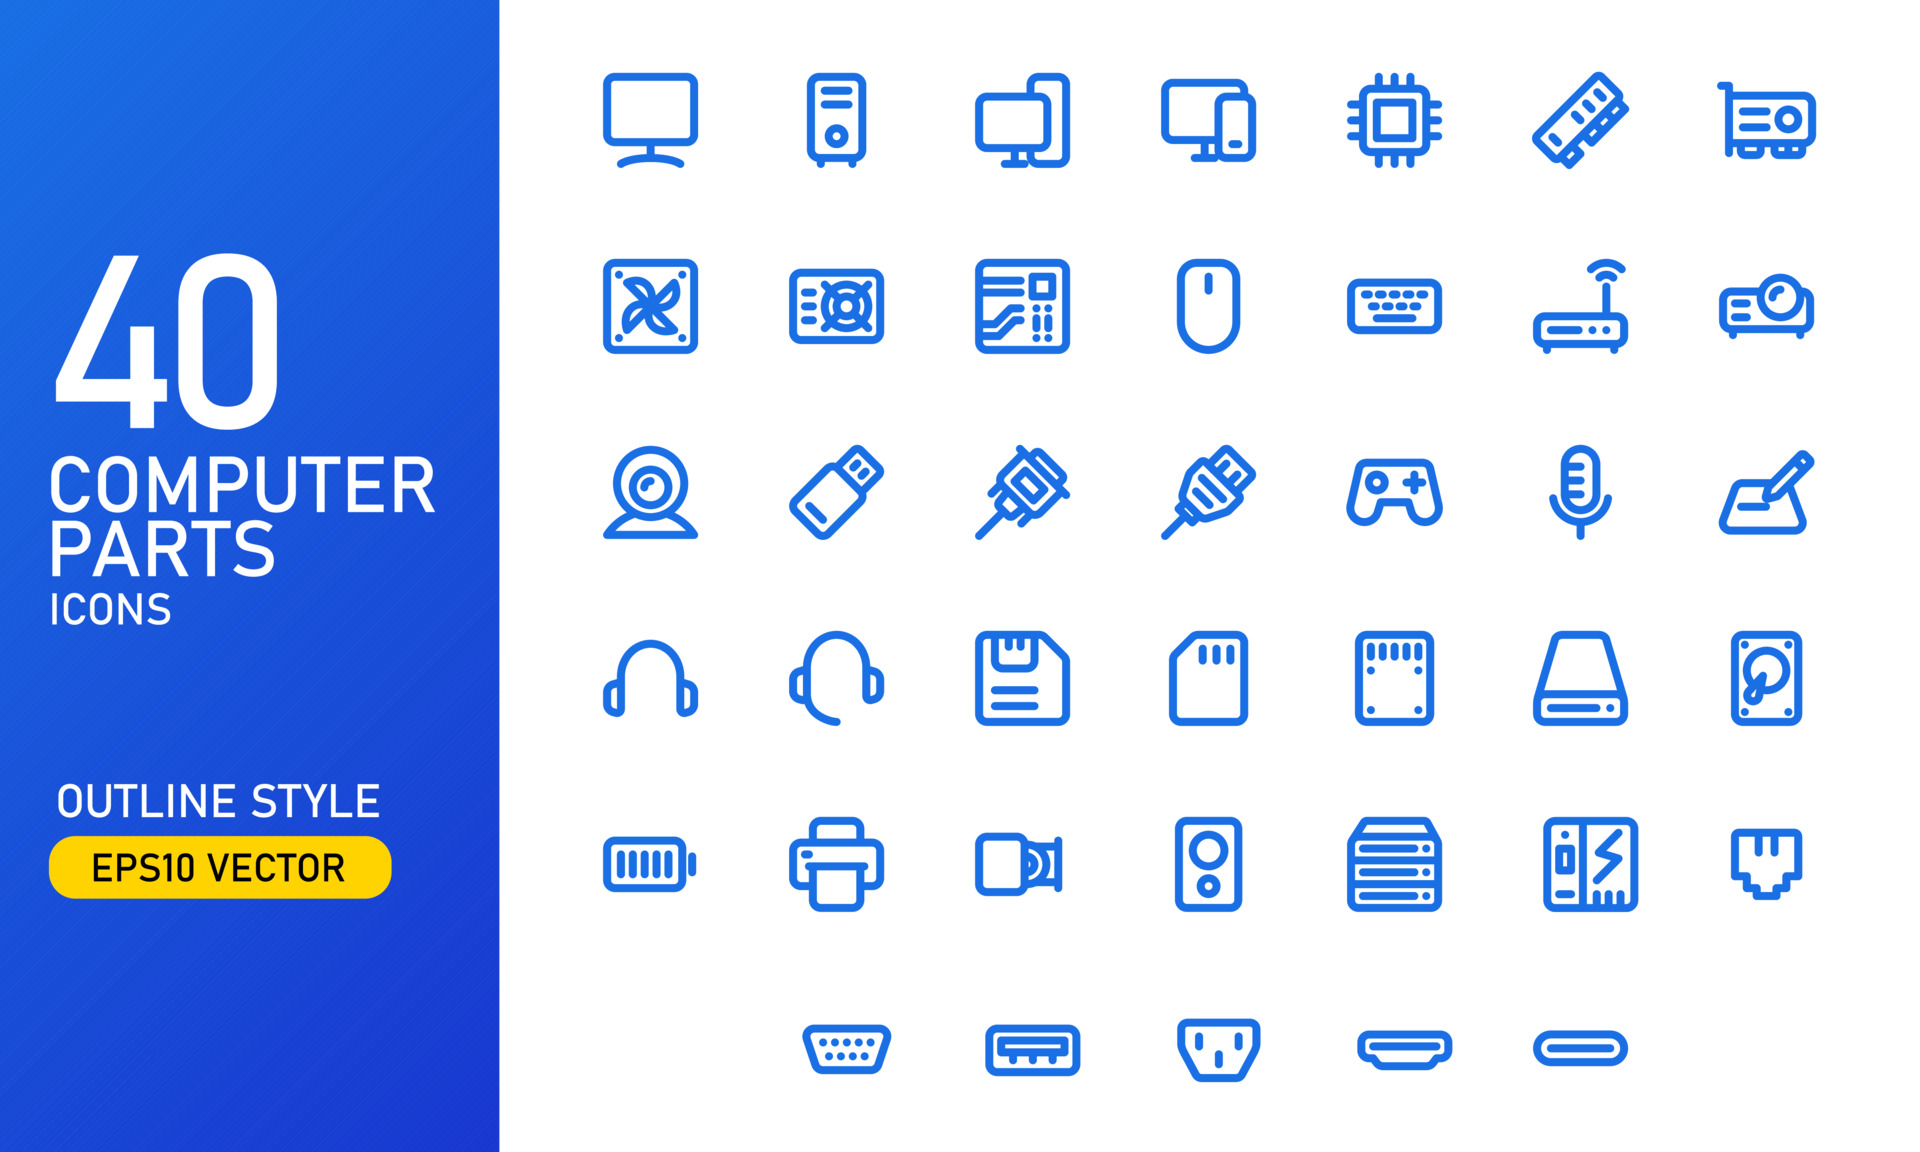 Computer Components Vector Art Icons And Graphics For Free Download